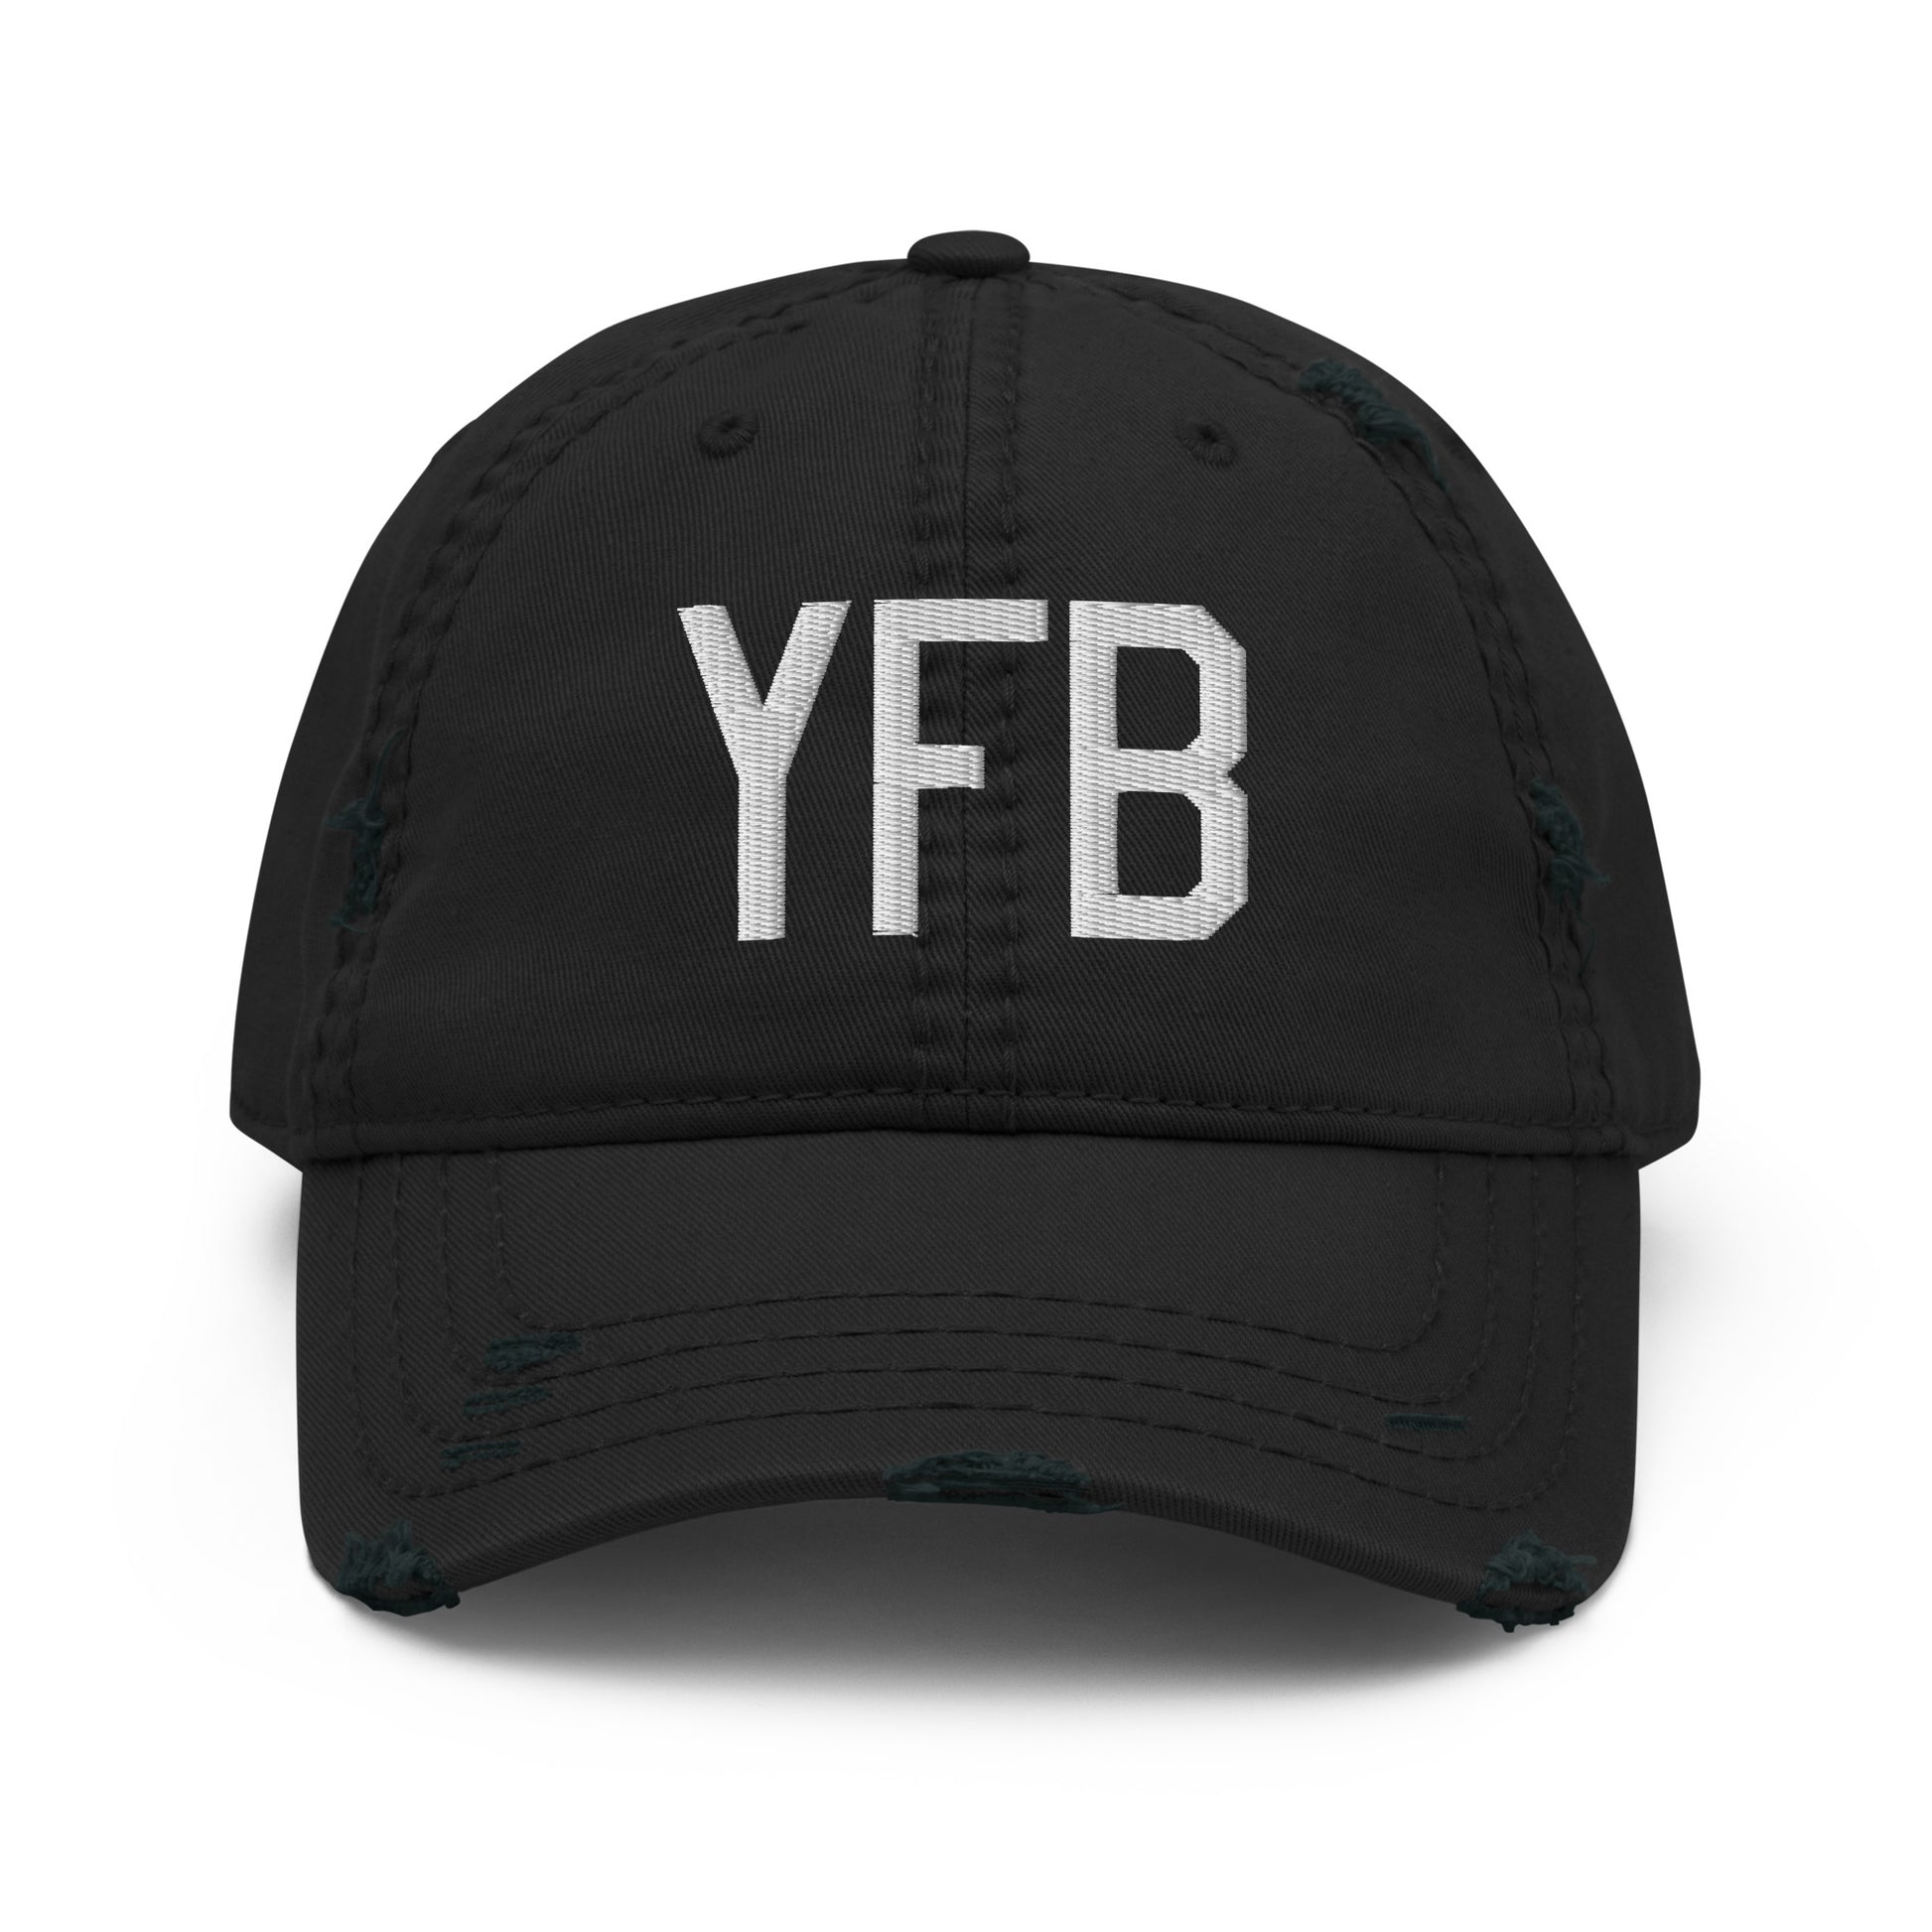 Airport Code Distressed Hat - White • YFB Iqaluit • YHM Designs - Image 10